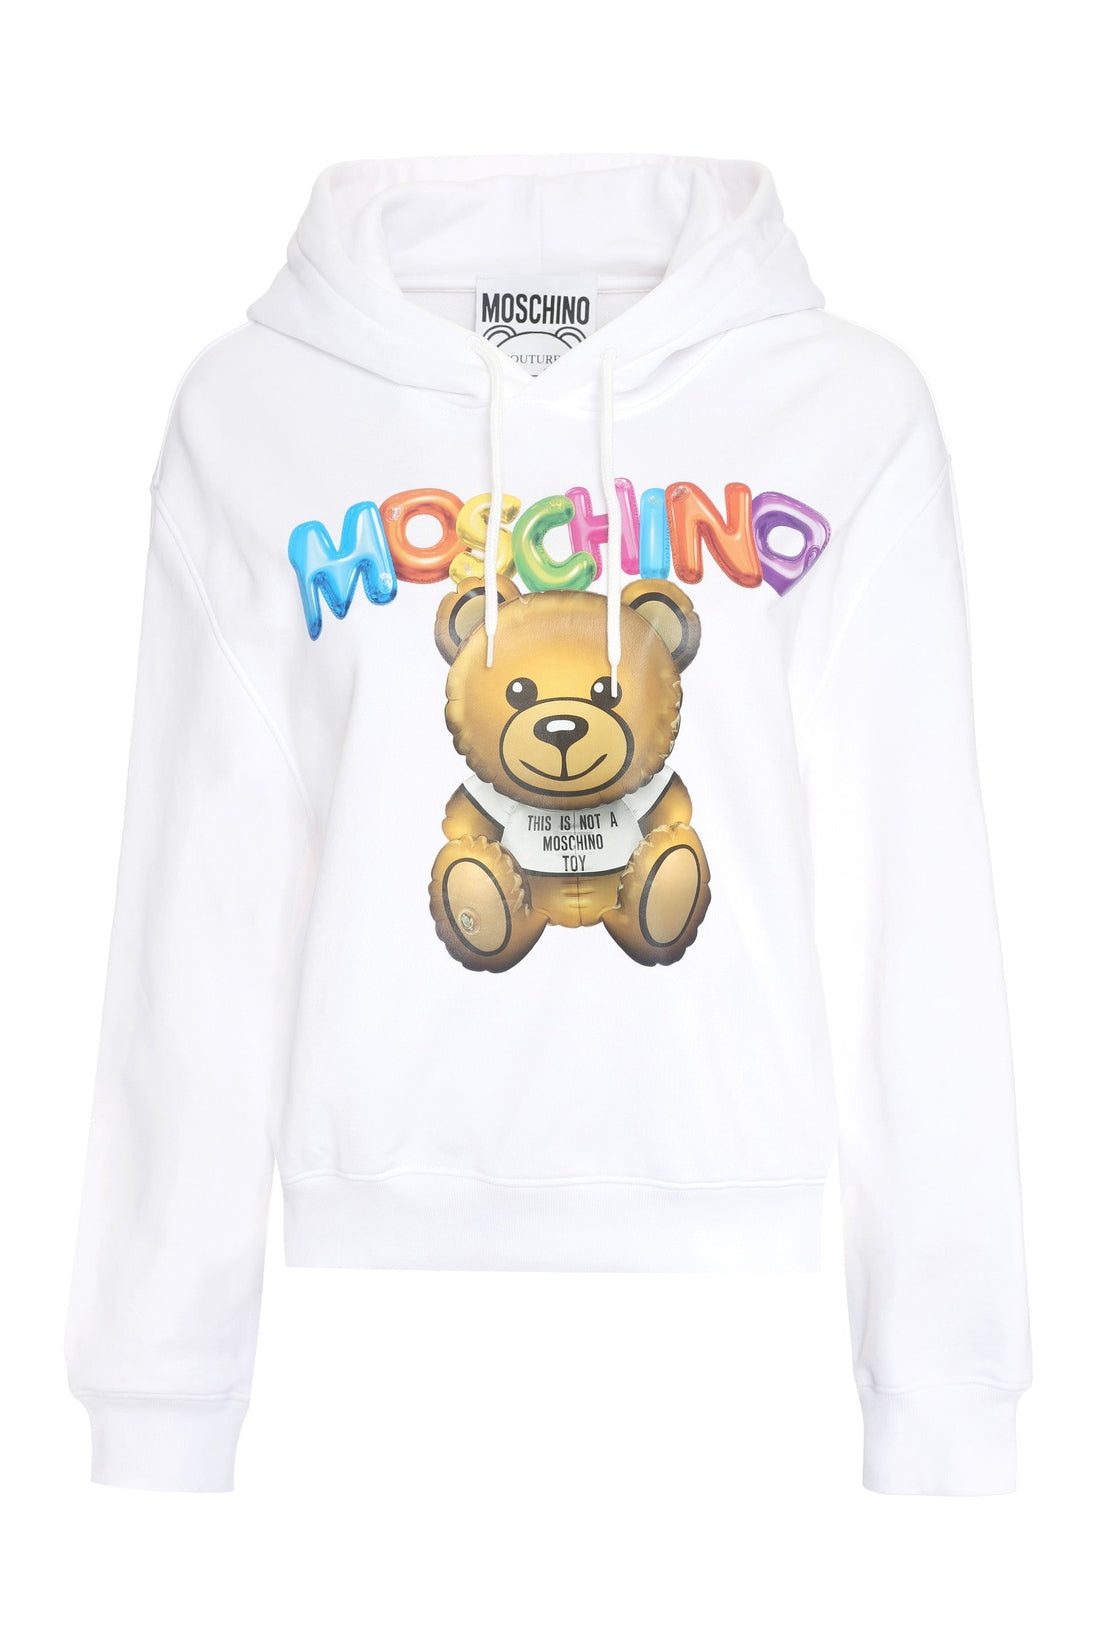 Moschino-OUTLET-SALE-Printed hoodie-ARCHIVIST